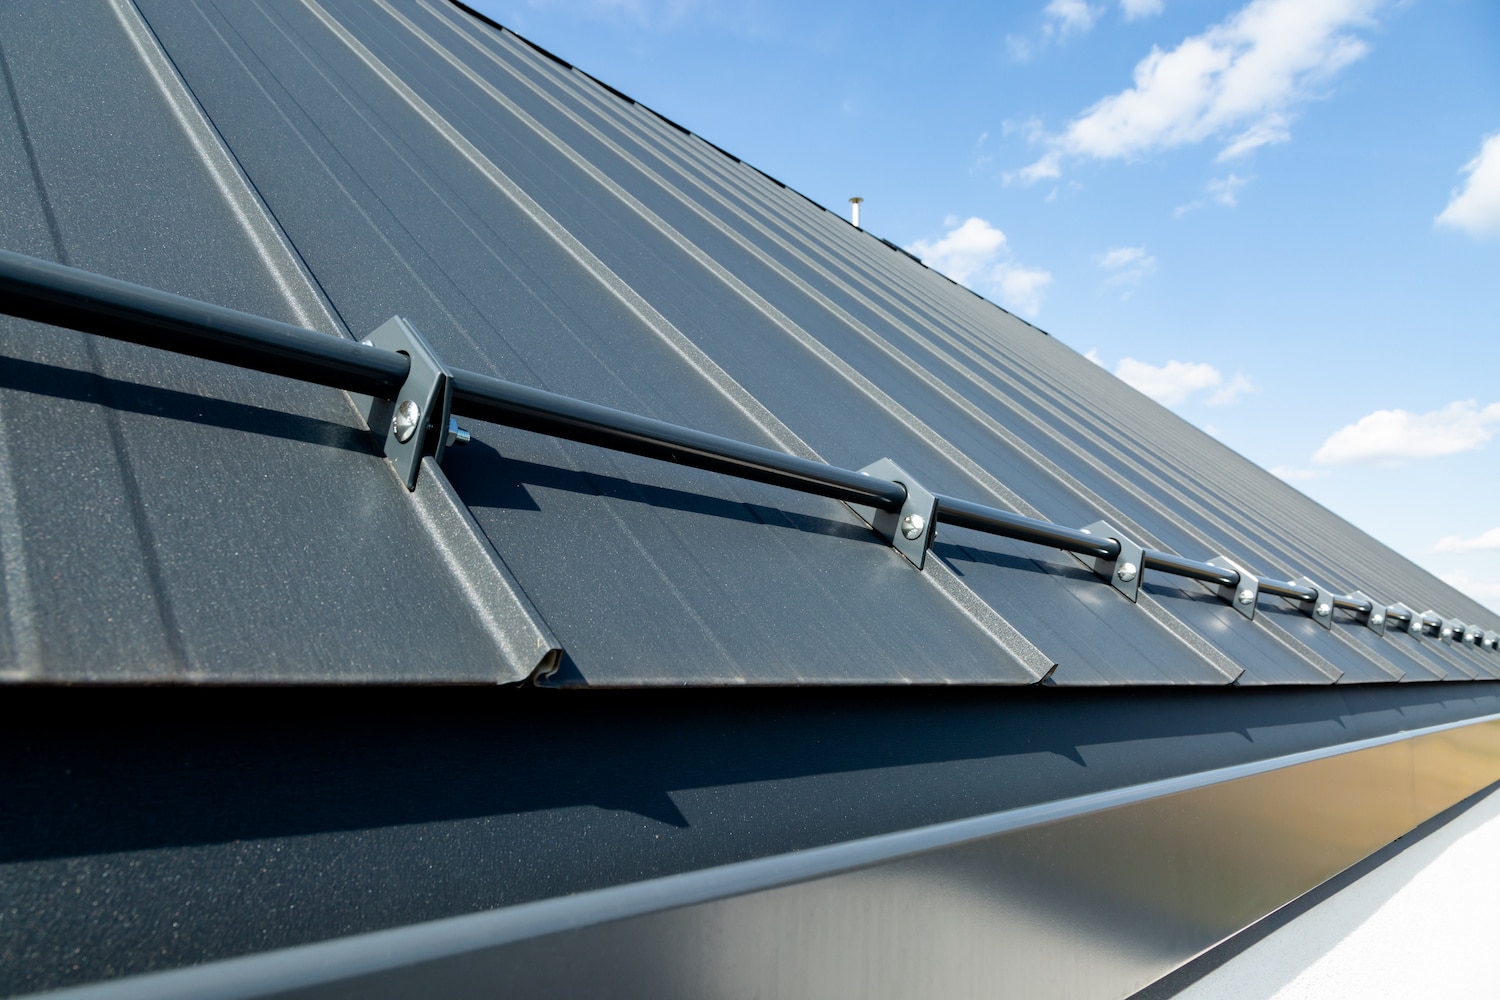 commercial roof types sheet metal